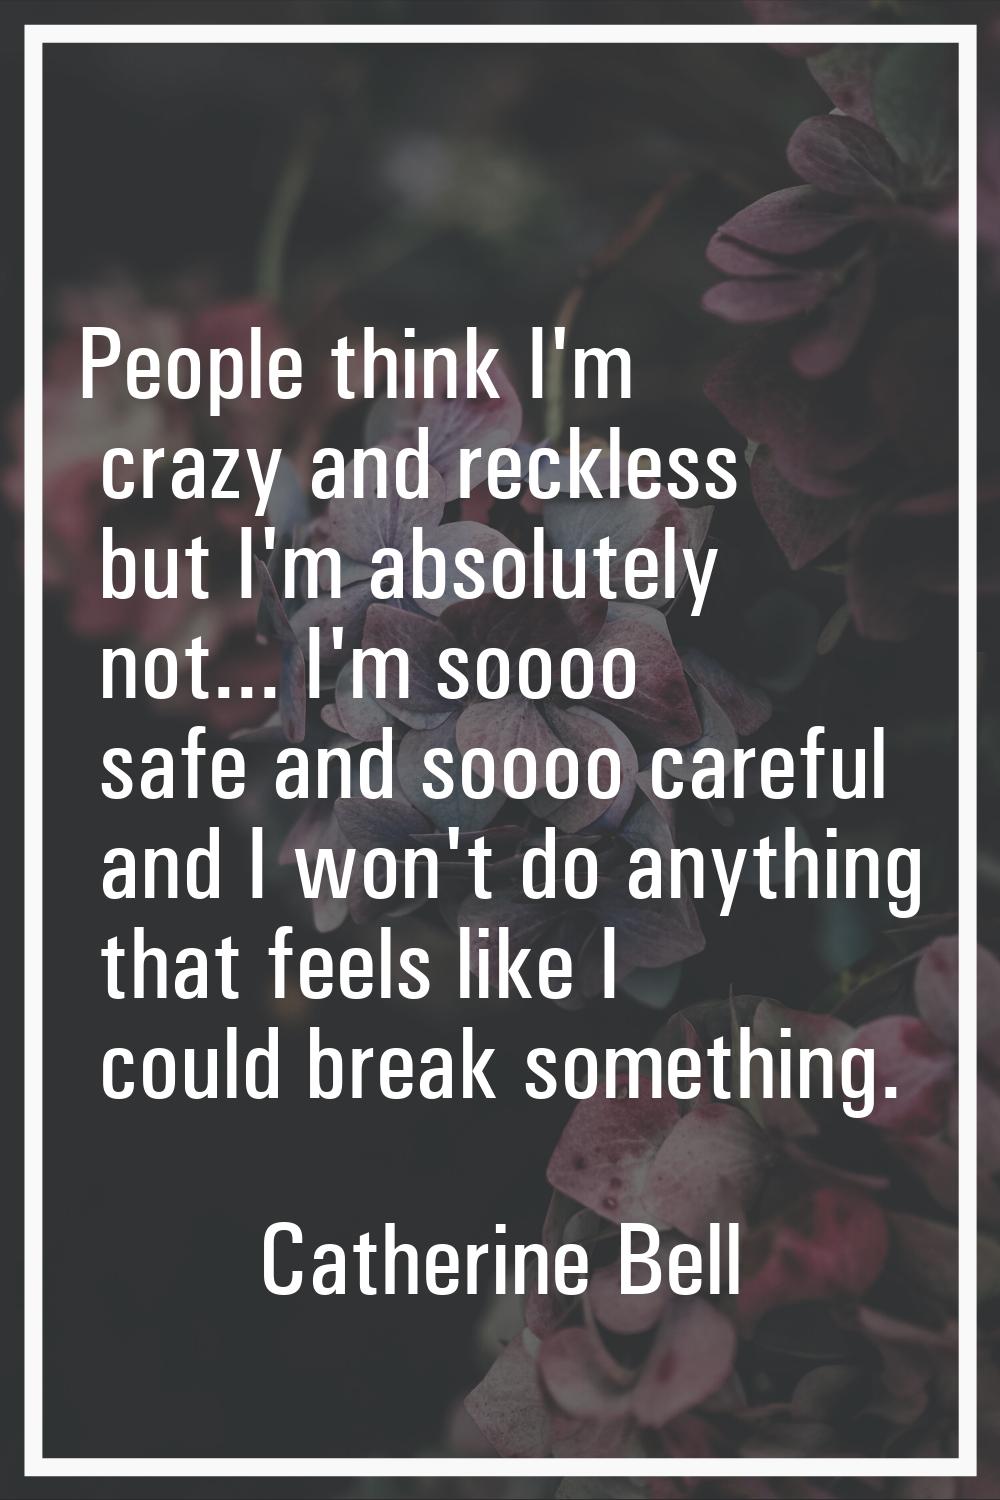 People think I'm crazy and reckless but I'm absolutely not... I'm soooo safe and soooo careful and 